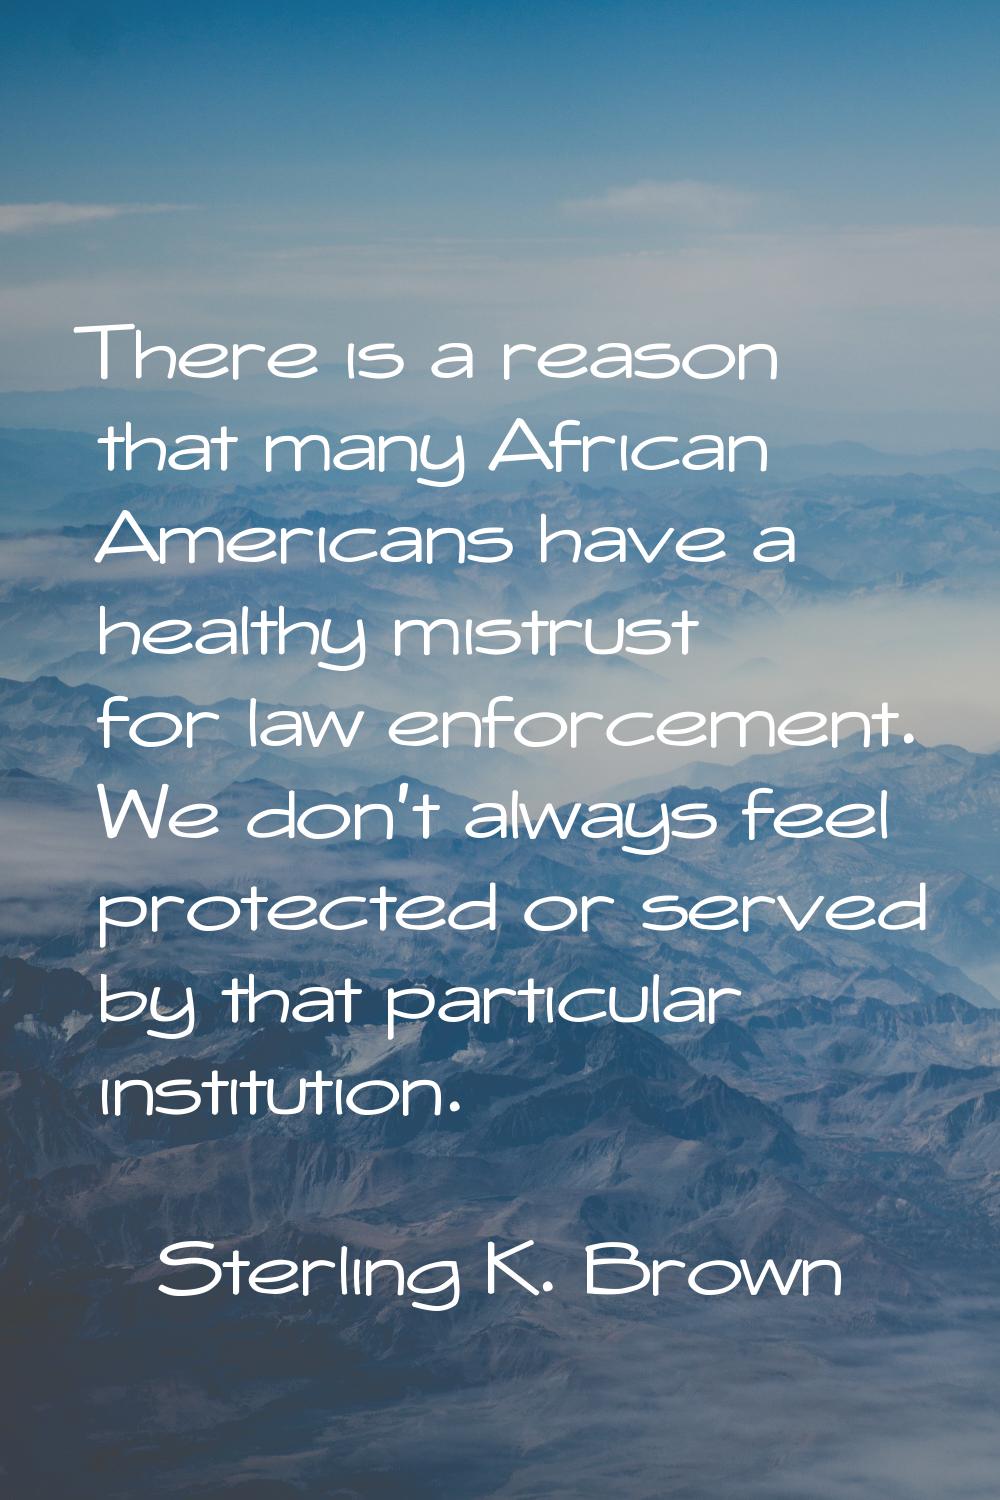 There is a reason that many African Americans have a healthy mistrust for law enforcement. We don't